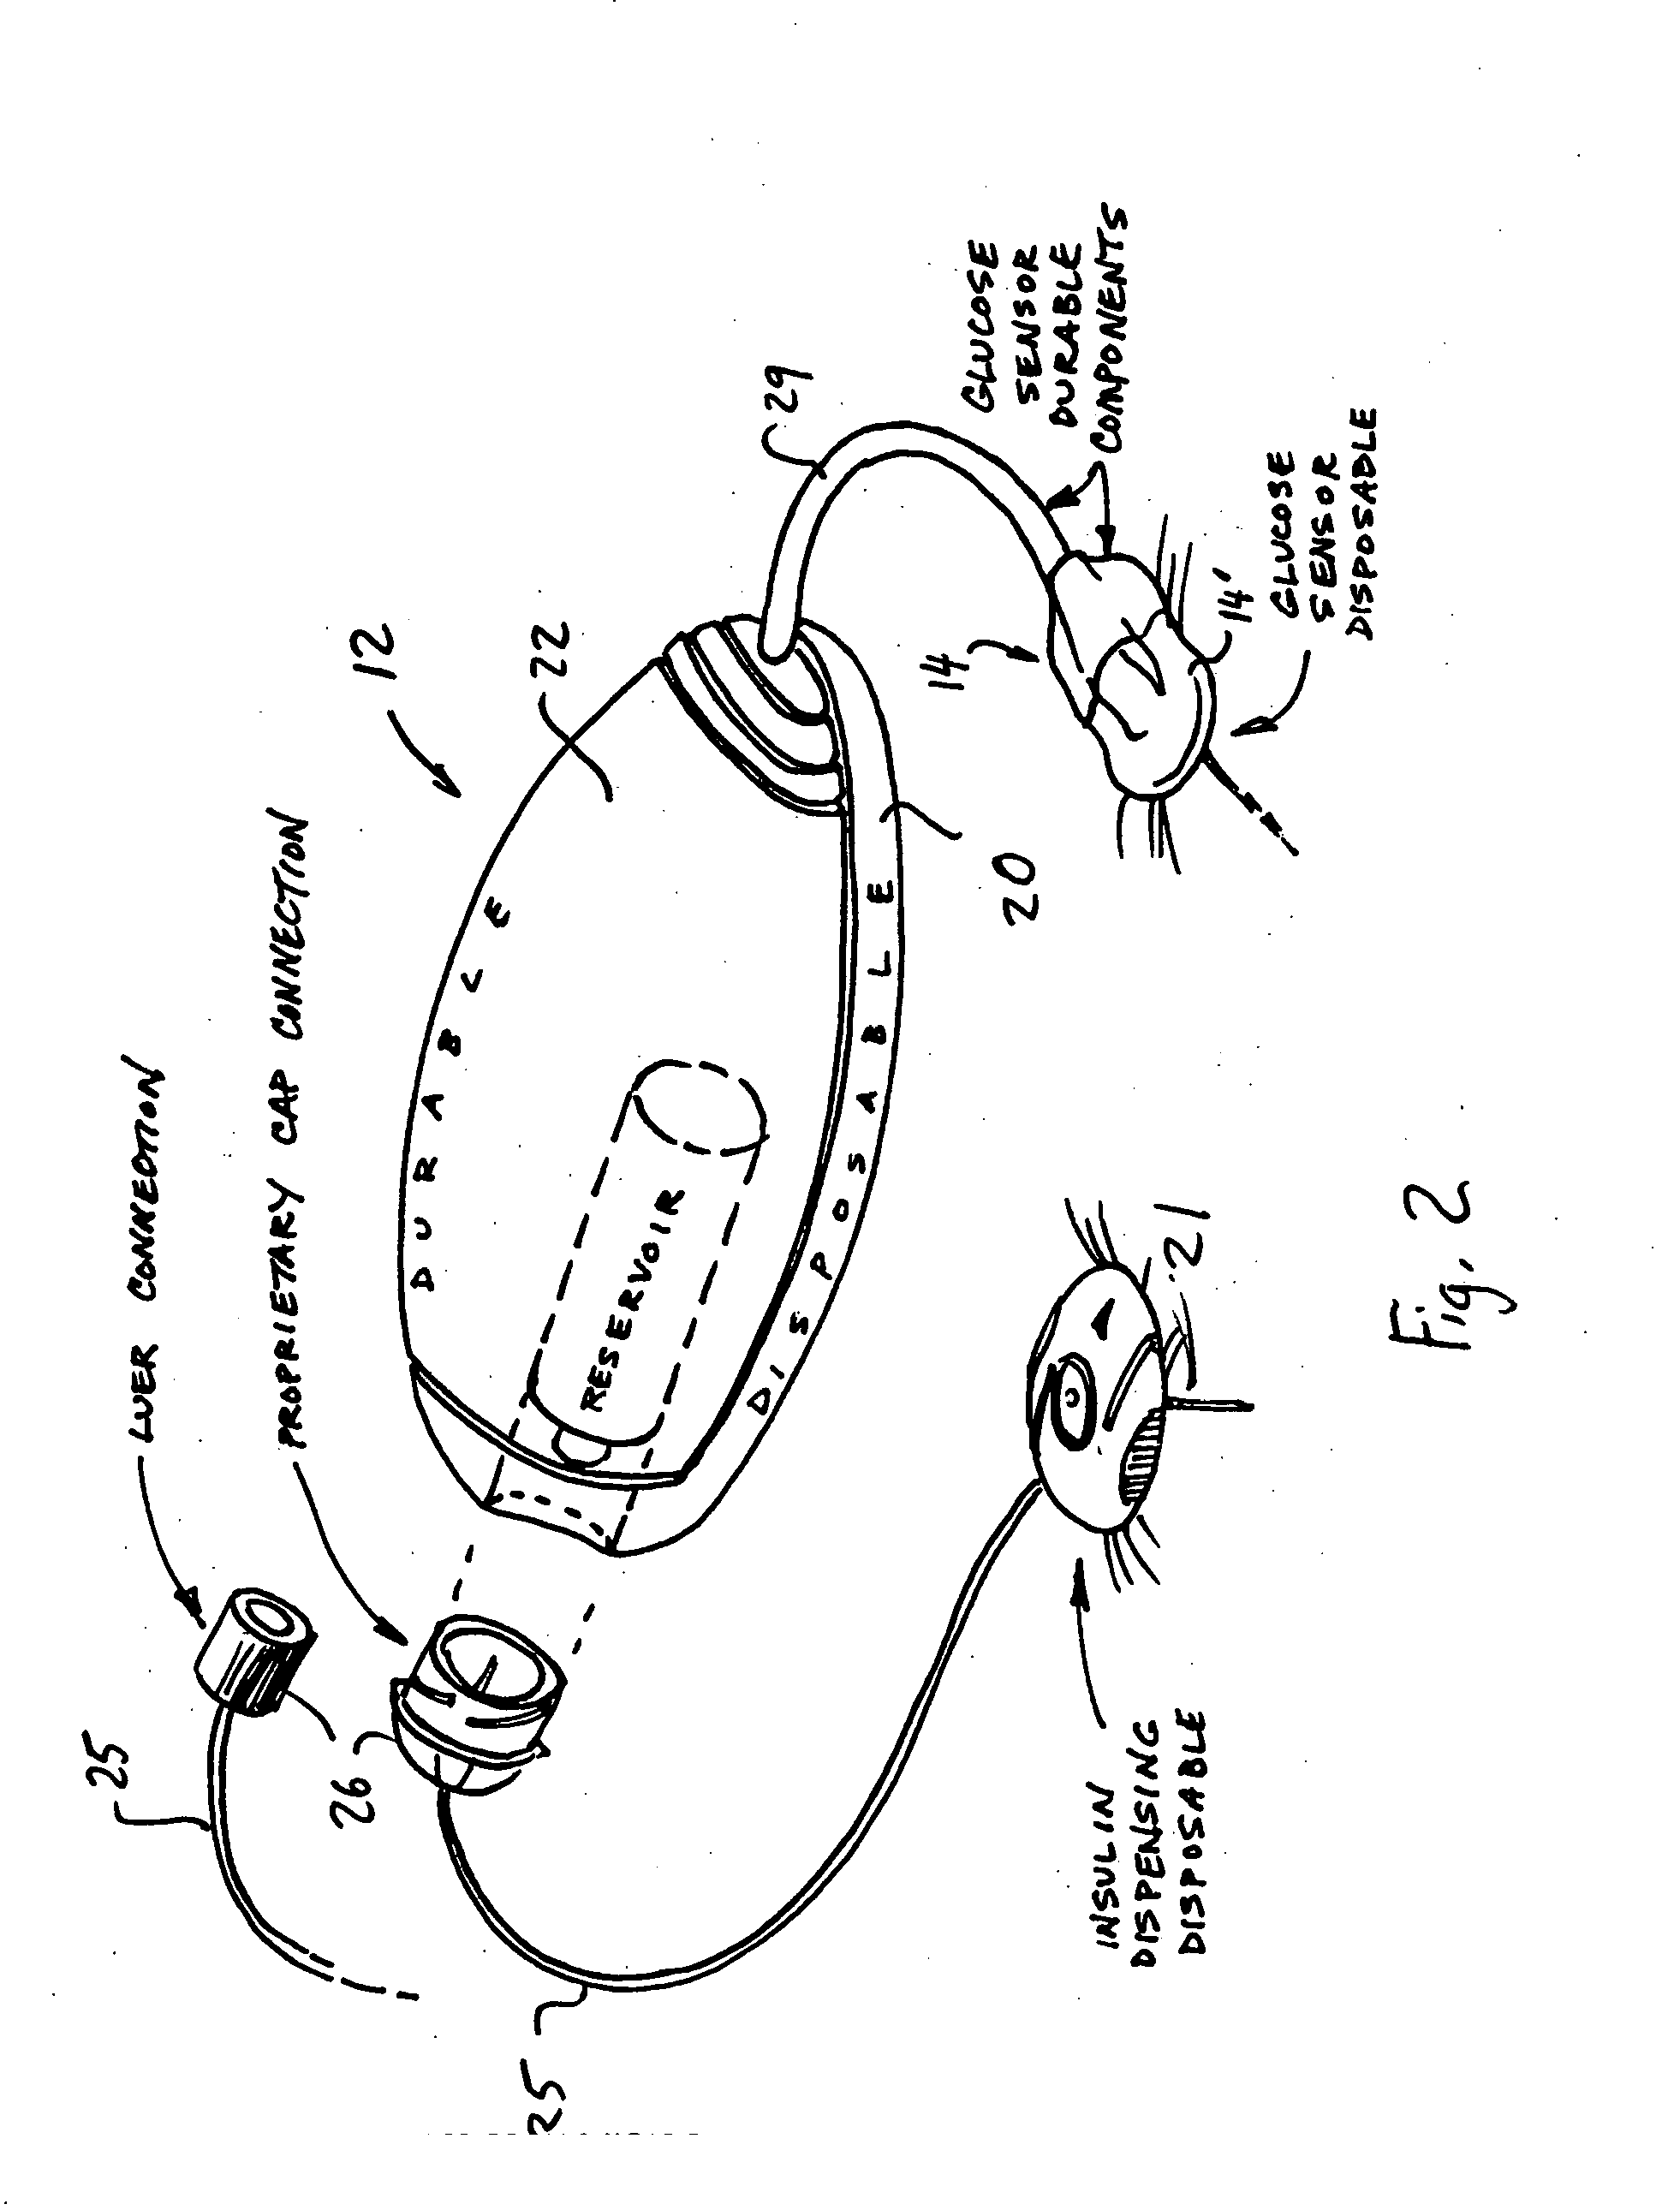 Infusion device and method with disposable portion